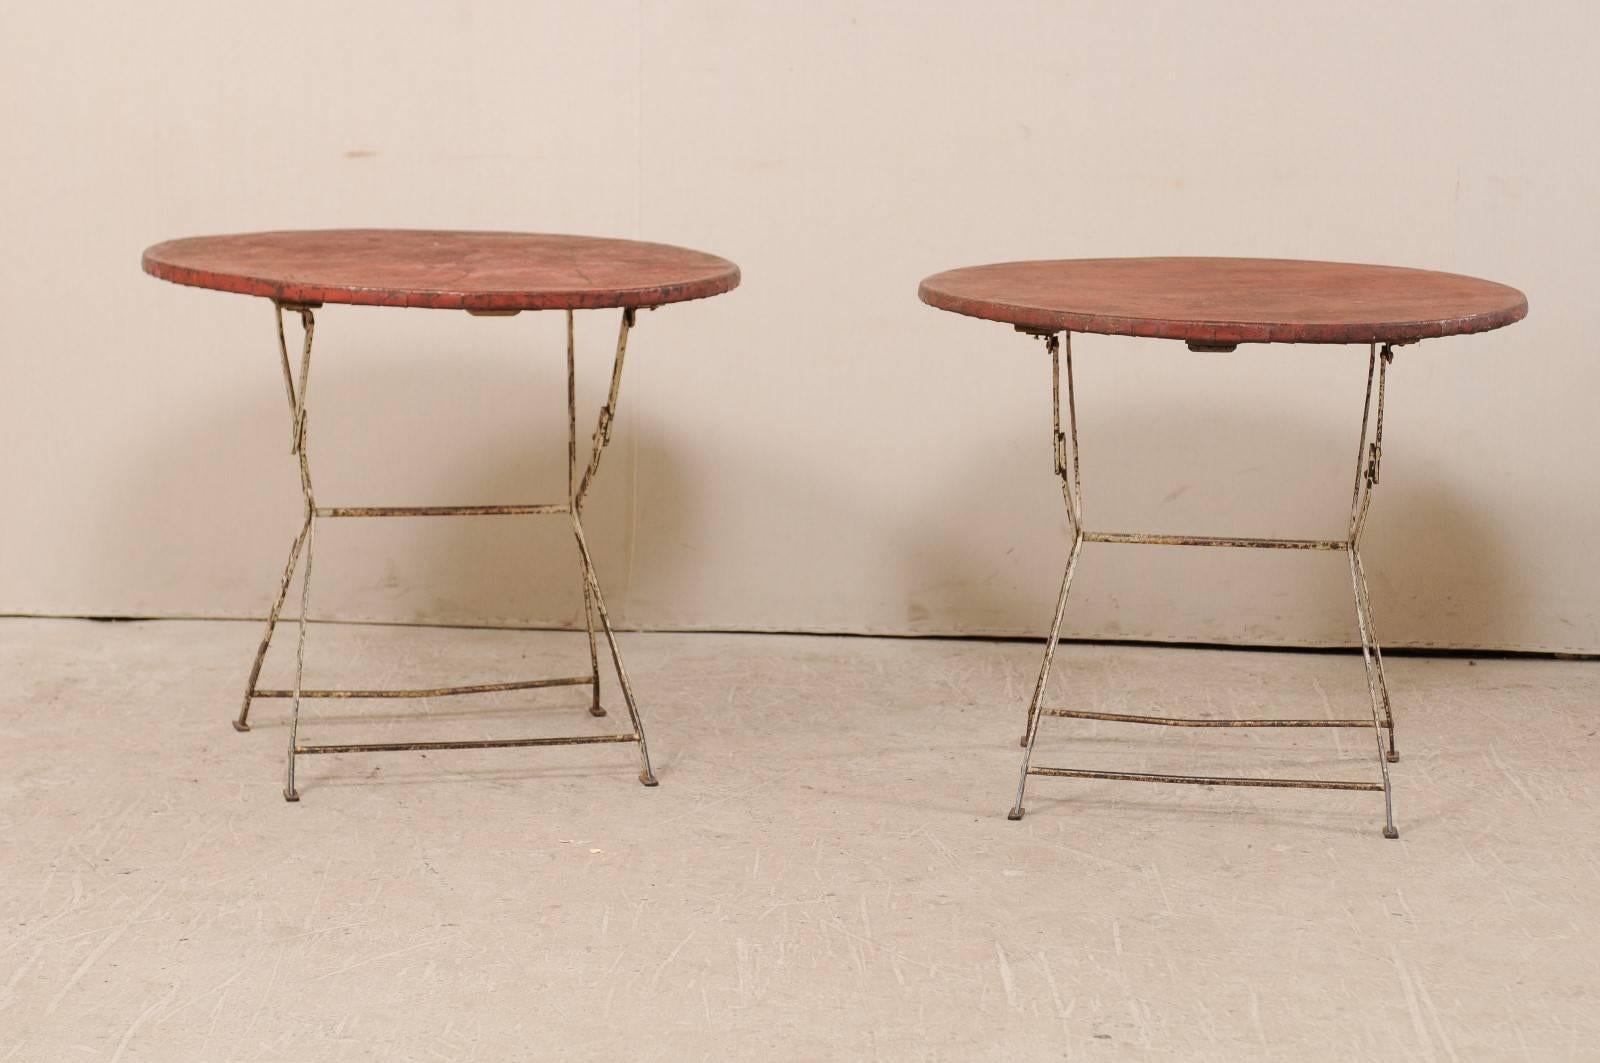 Painted Pair of French Vintage Bistrot / Café Folding Patio / Porch Tables with Red Tops